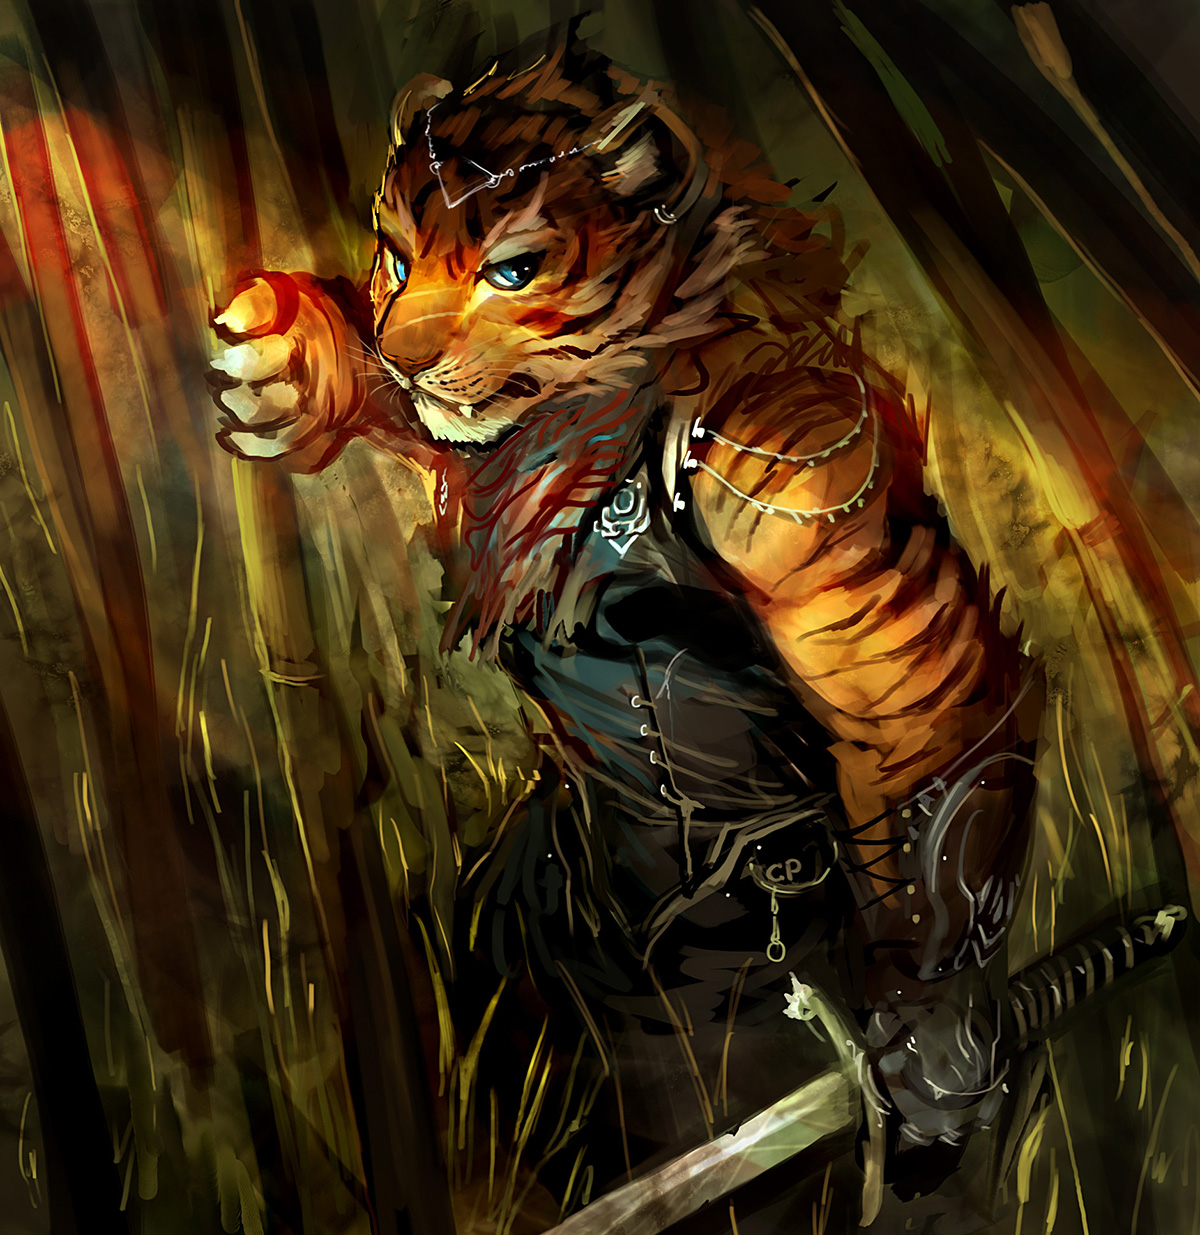 Tiger in the Woods - Furry, Furry art, Furry feline, Furry tiger, Cheetahpaws